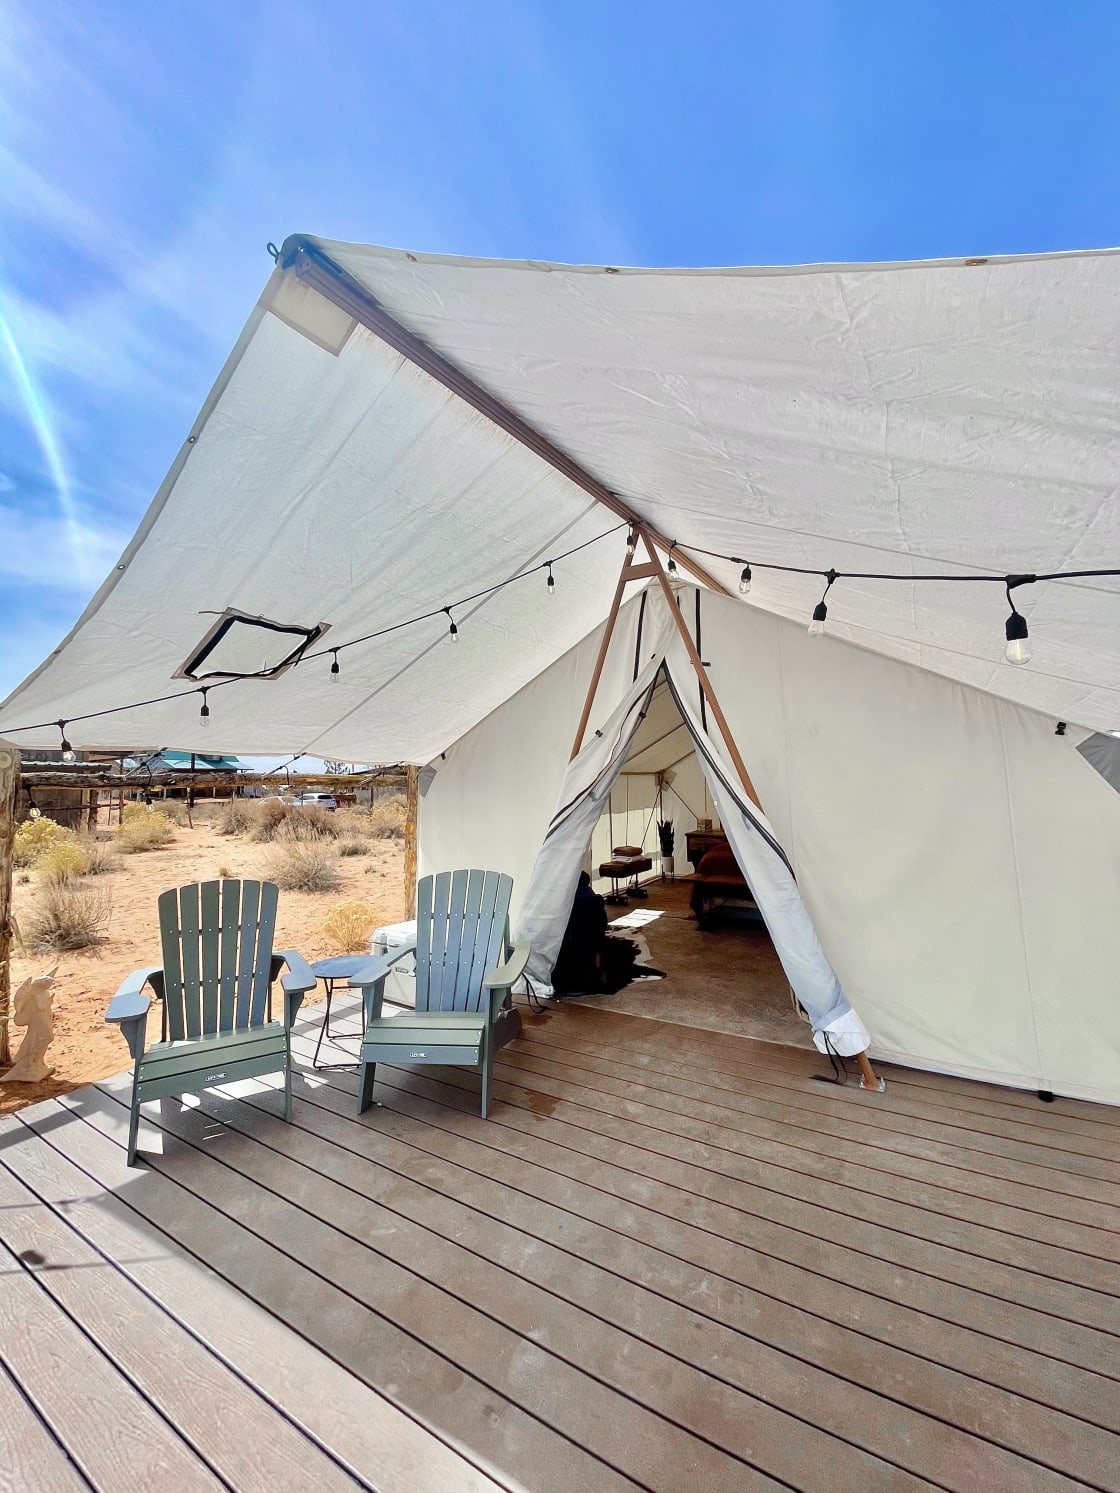 14X16 heavy duty canvas tent with concrete floors and a hardwood patio. Our tent is run on solar energy and has front porch lighting, indoor lighting and outlets.